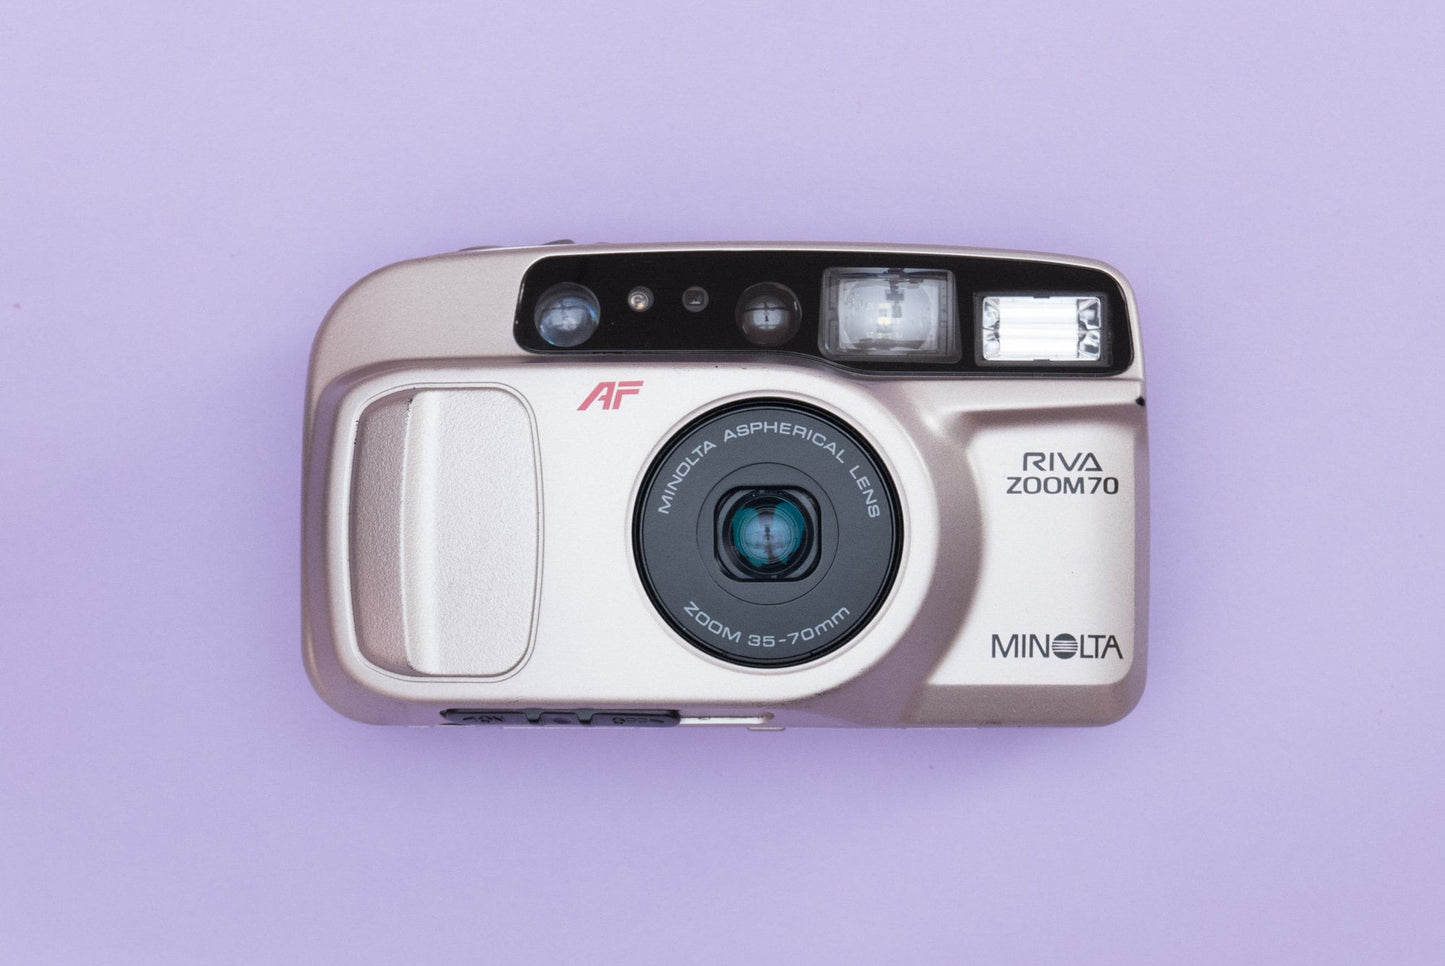 Minolta Riva Zoom 70 Compact 35mm Point and Shoot Film Camera